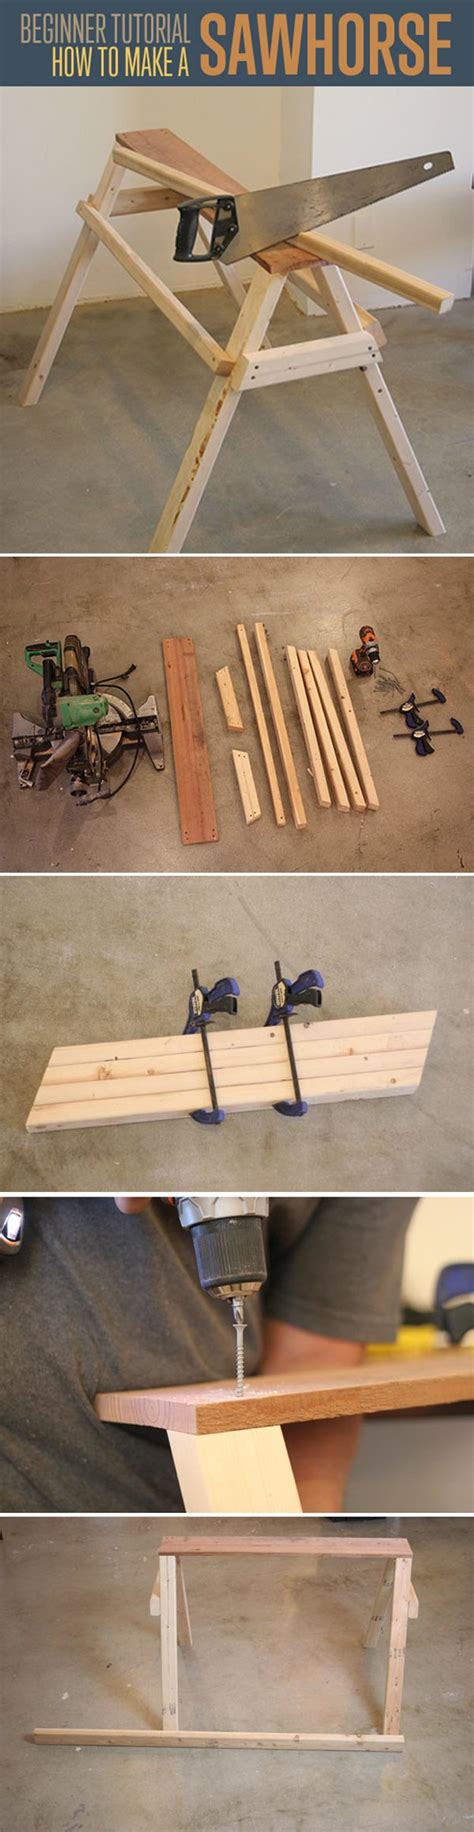 Easy Woodworking Projects DIYReady.com | Easy DIY Crafts, Fun Projects ...